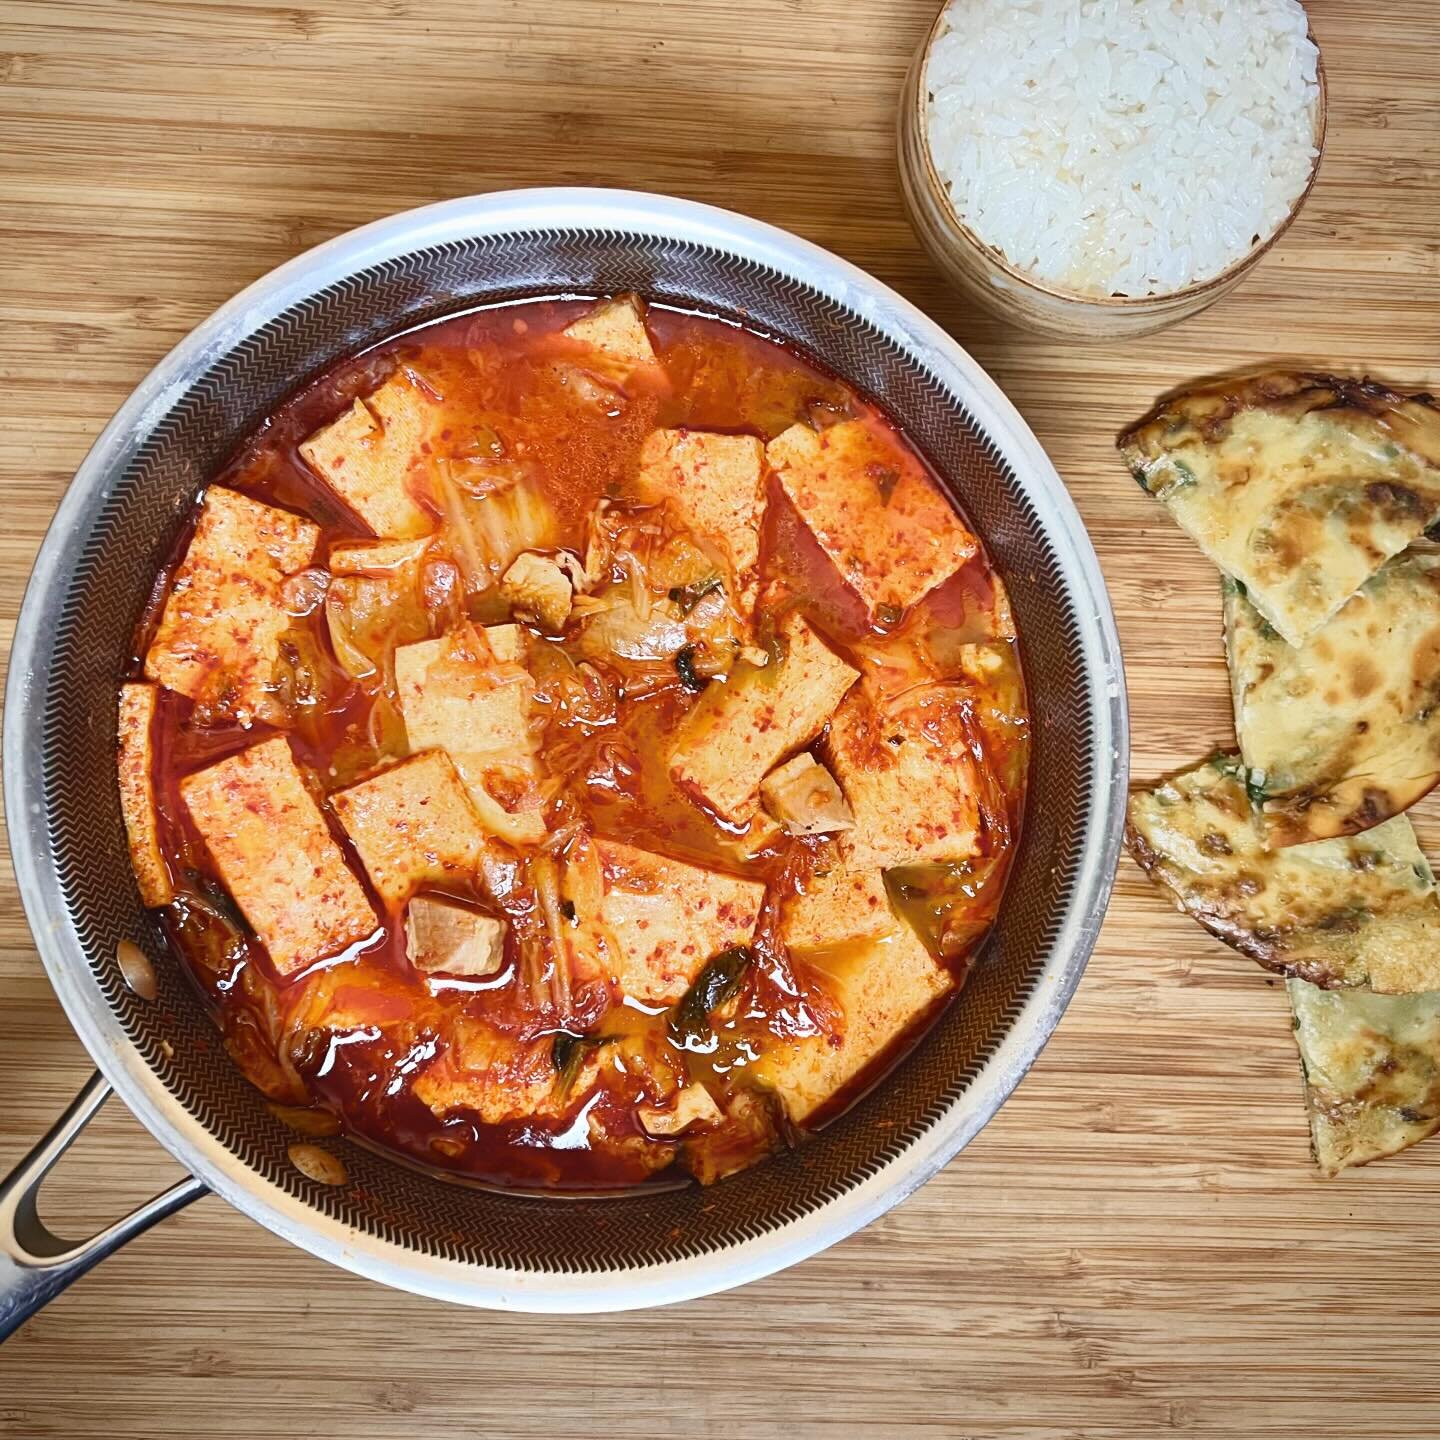 Cooking the books 10/100: Kimchi jjigae (Maangchi&rsquo;s Big Book of Korean Cooking, @maangchi)

I can&rsquo;t believe it took me this long to make kimchi jjigae, a simple stew made with&mdash;you guessed it!&mdash;kimchi. It was so good that I alre